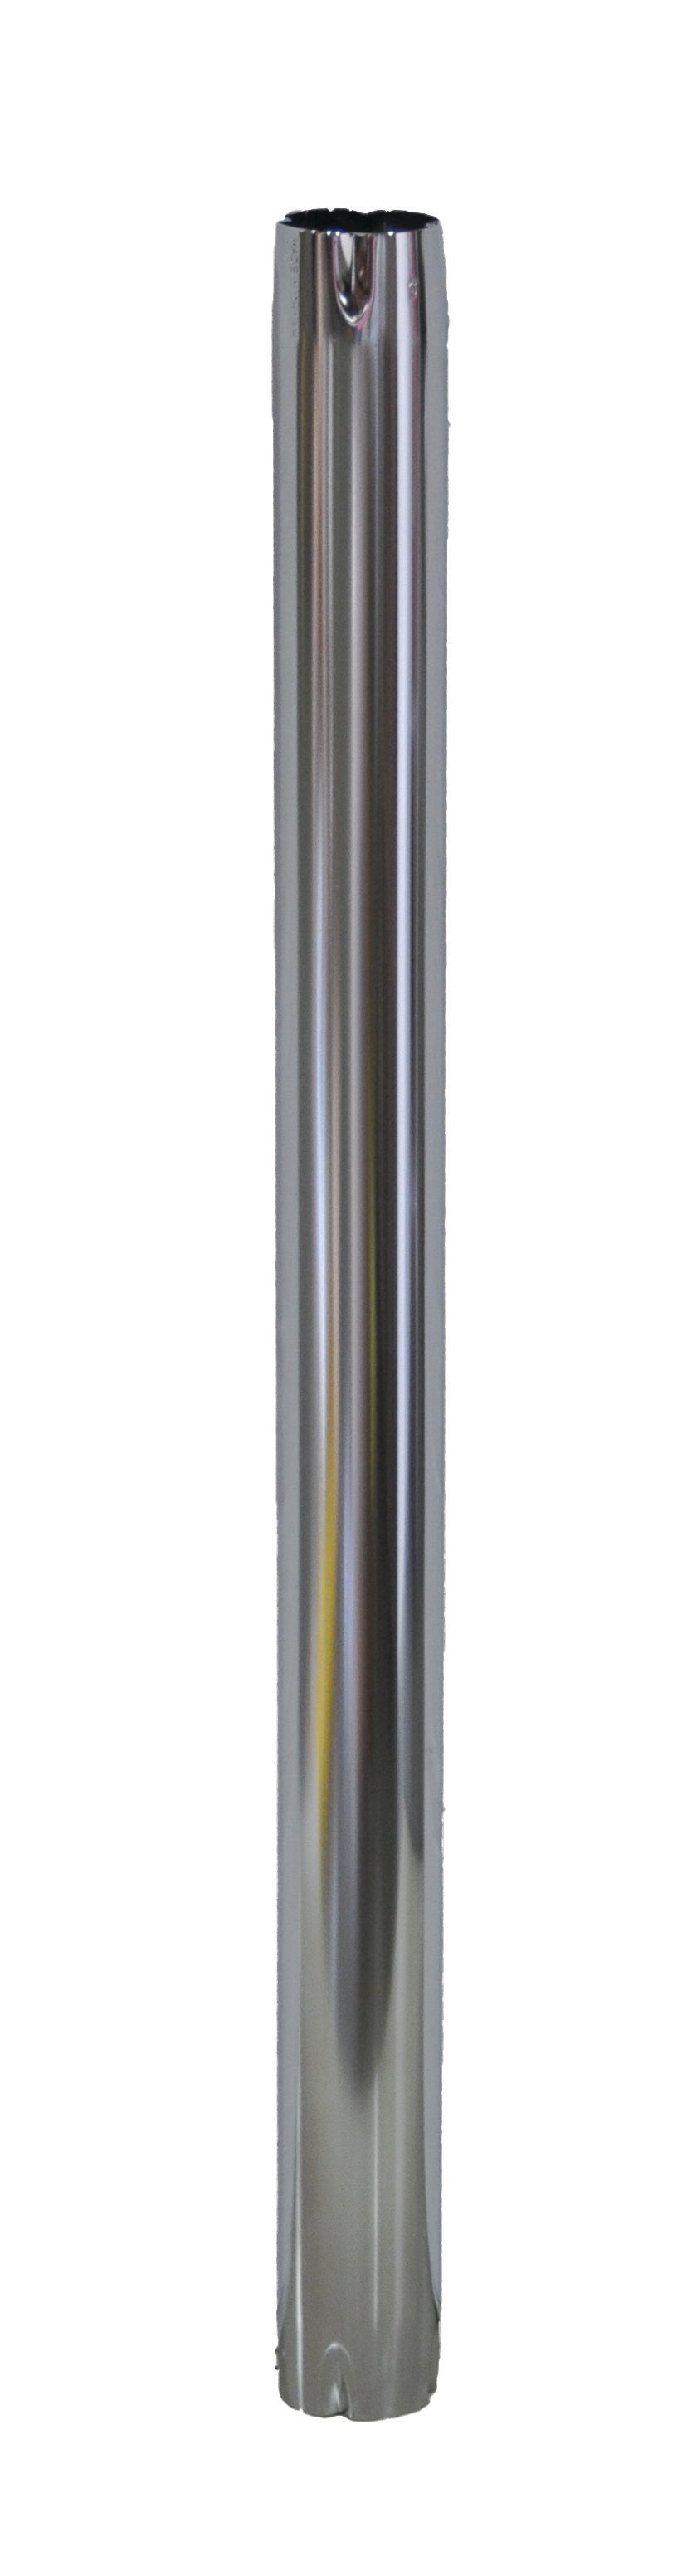 Heng's HG615L Chrome Table Leg, 31-1/2" or AP Products 013-956